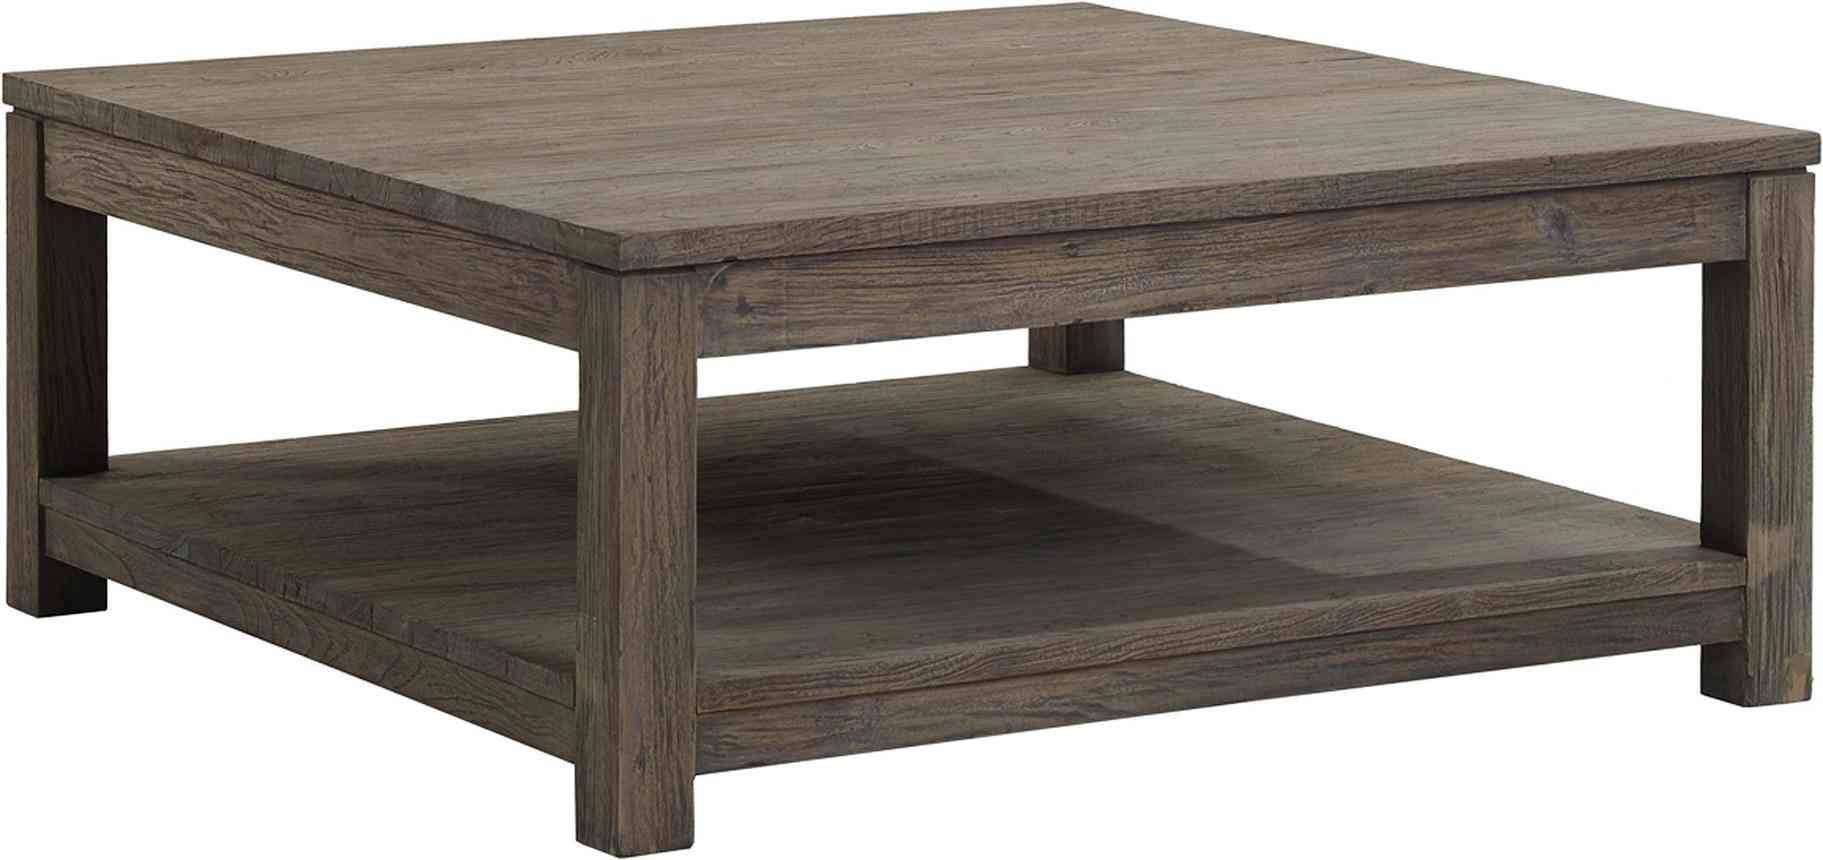 Large Wooden Coffee Table Easy Lift Top Coffee Table For Coffee With Regard To Large Wood Coffee Tables (View 1 of 15)